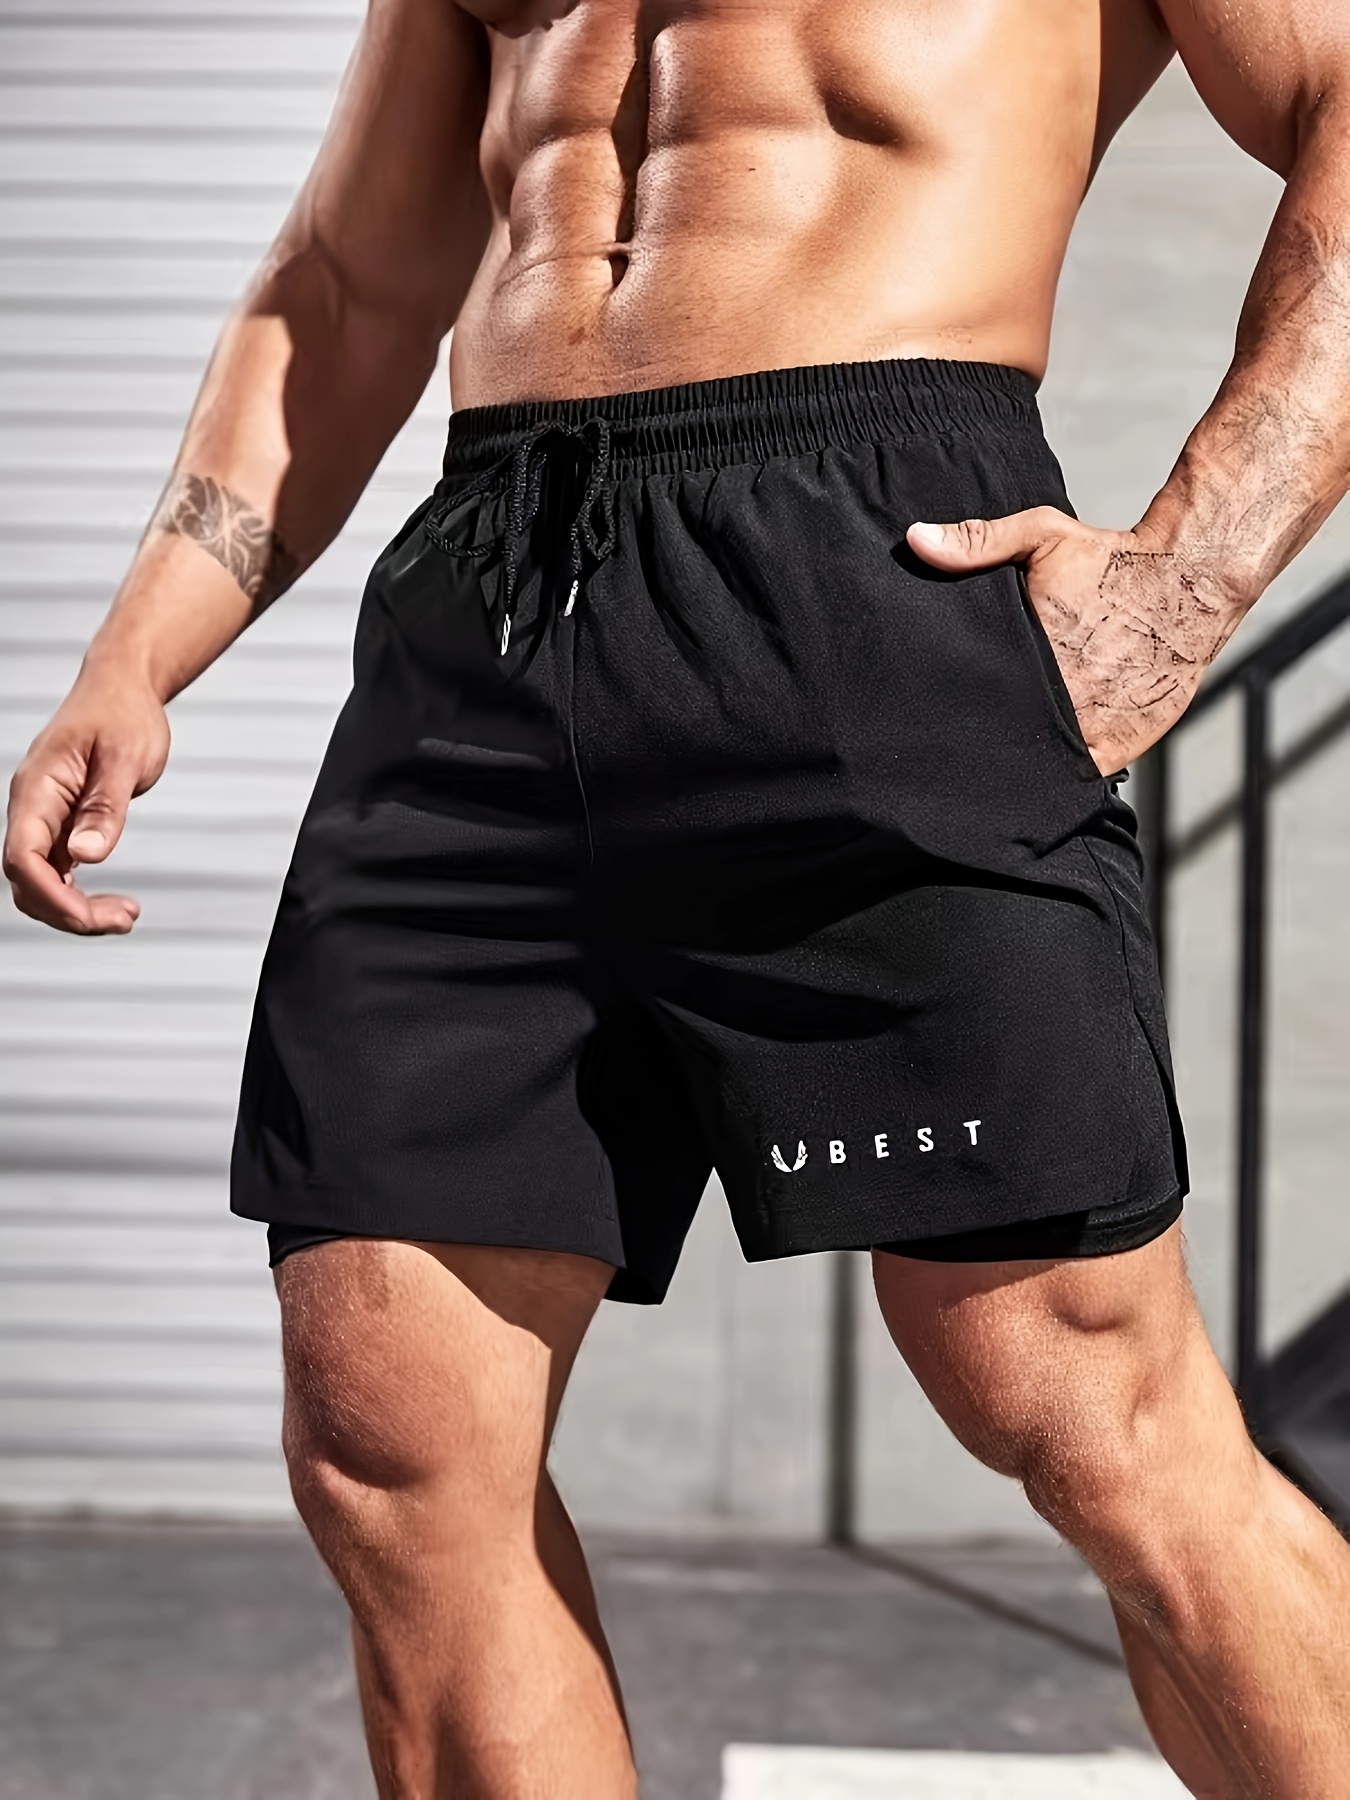 Men's 2 In 1 Running Shorts, Activewear, Phone Pocket Stretch Drawstring  Sport Shorts, Lightweight Quick Dry Athletic Shorts For Gym Fitness Workout